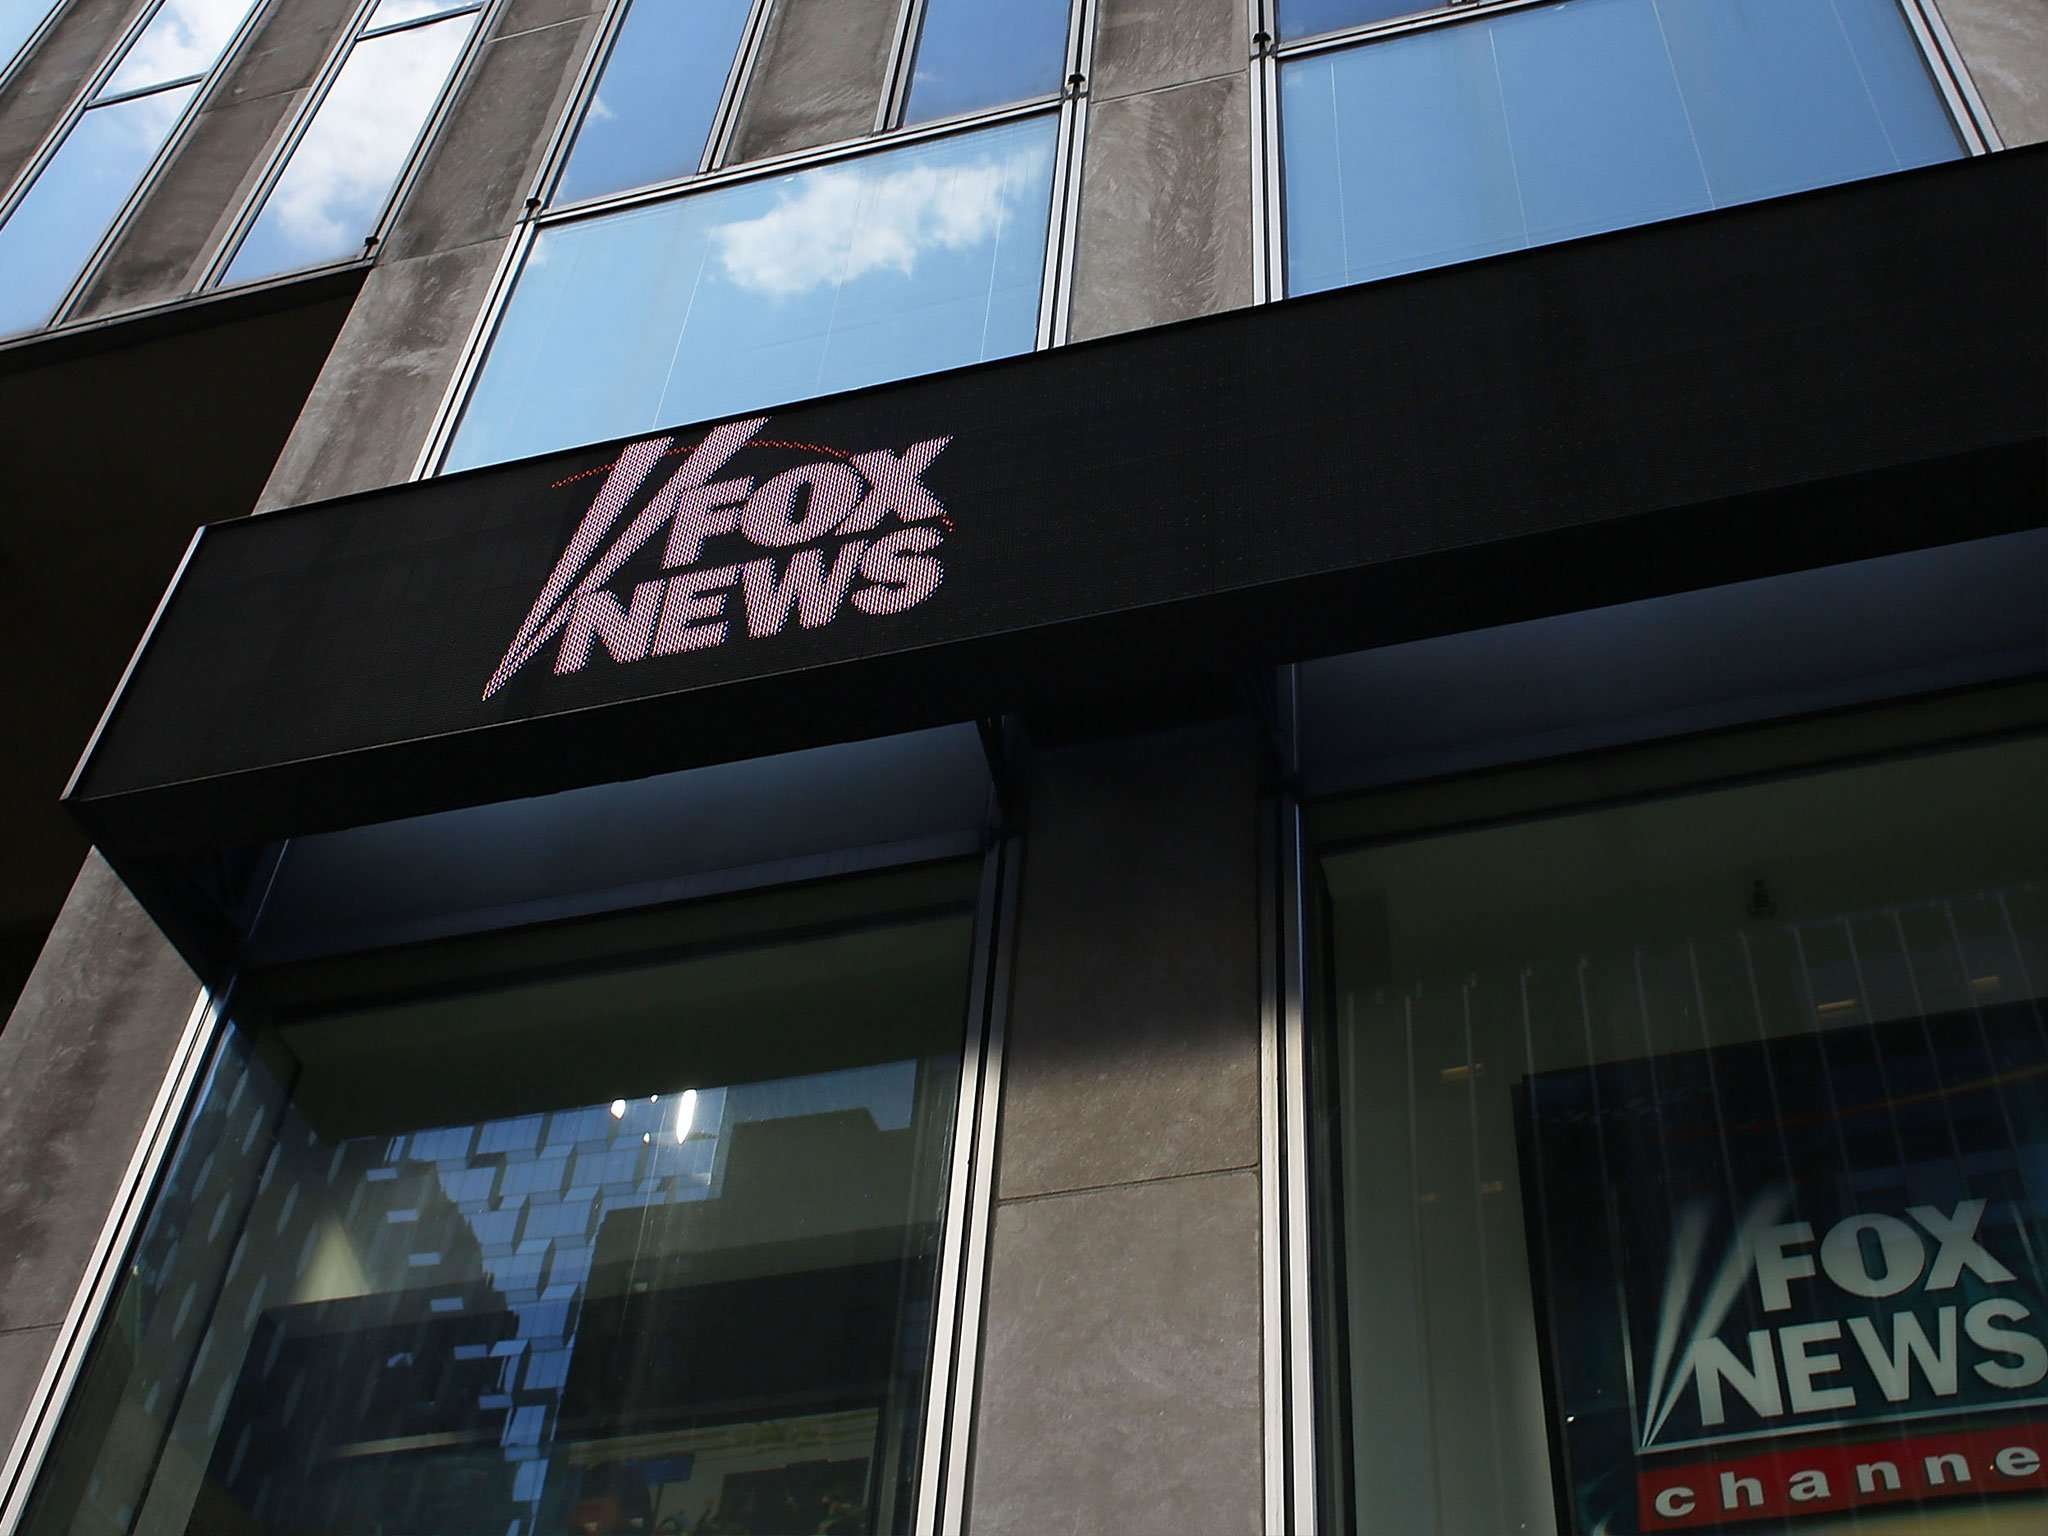 image for Fox News radio reporter sues broadcaster for being 'fired 24 hours after contacting complaint hotline'